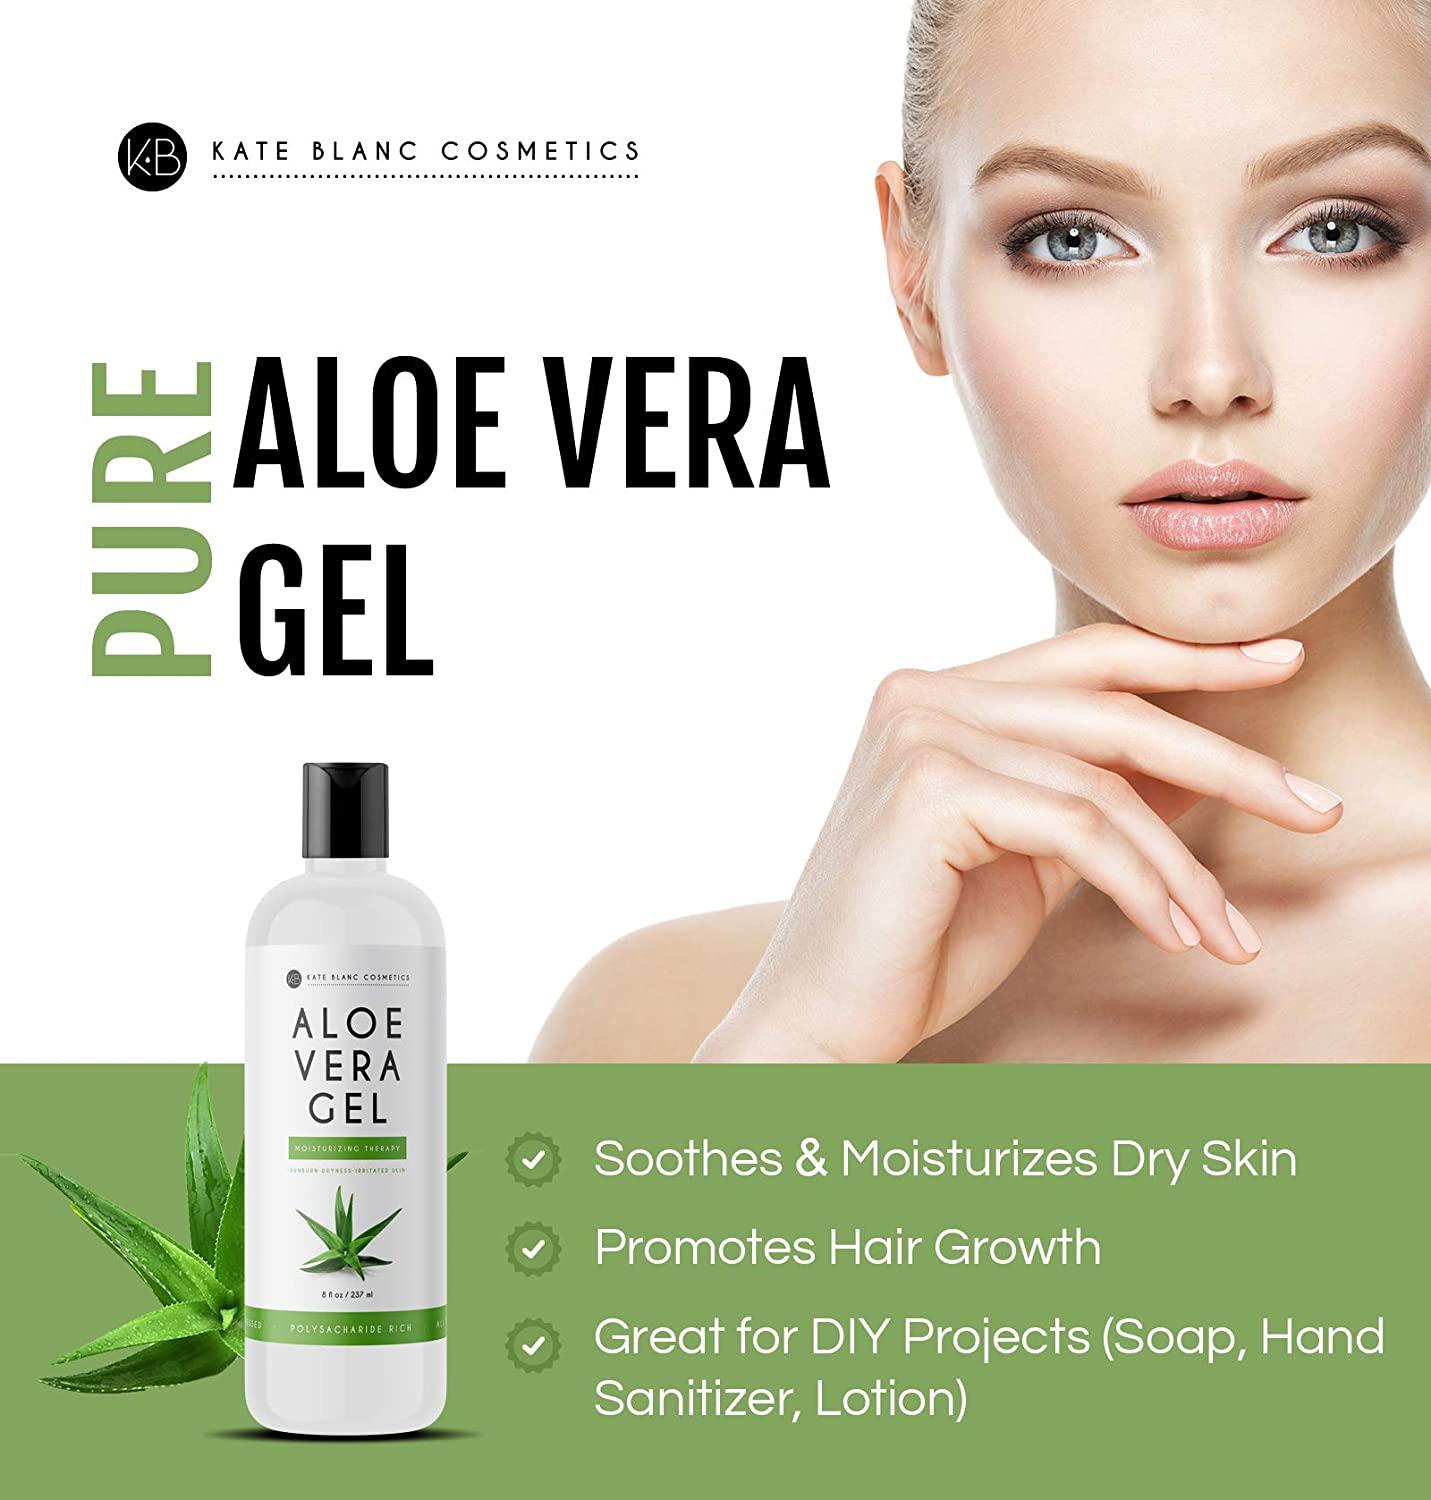 Aloe Vera Gel for Face and Skin (8 oz) - Kate Blanc Cosmetics. Pure Aloe  Vera Gel for Hair Growth. Aloe Gel Great for Sunburn Relief, Burns, Dry  Scalp Moisturizer. Made from